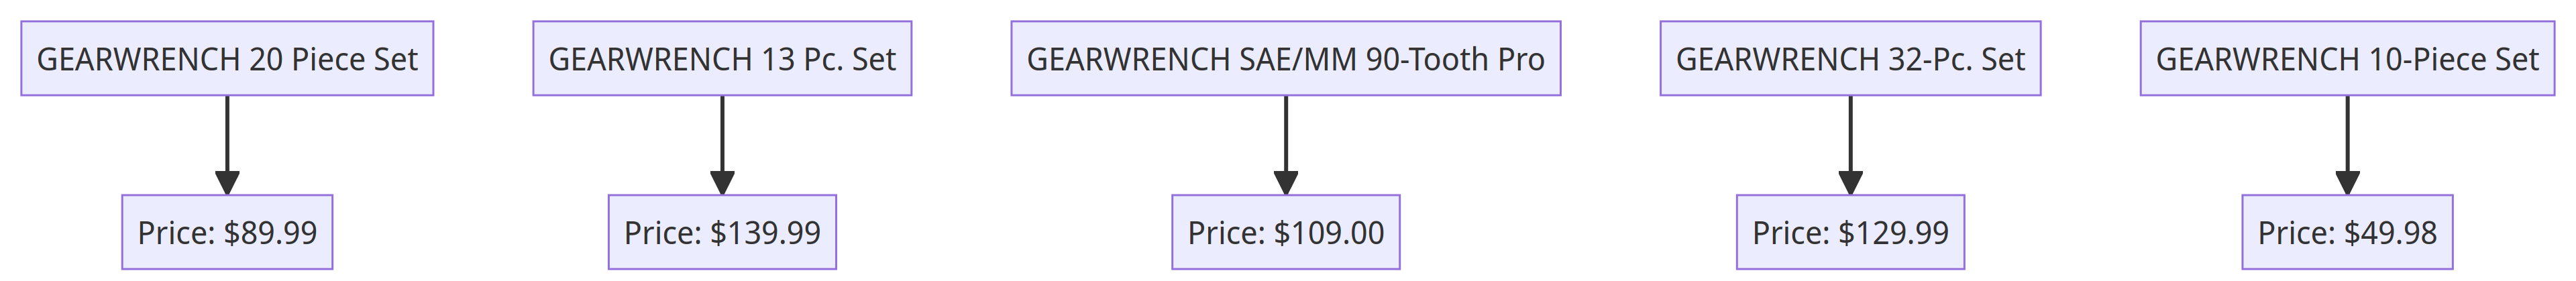 Flow Chart of GearWrench Sets